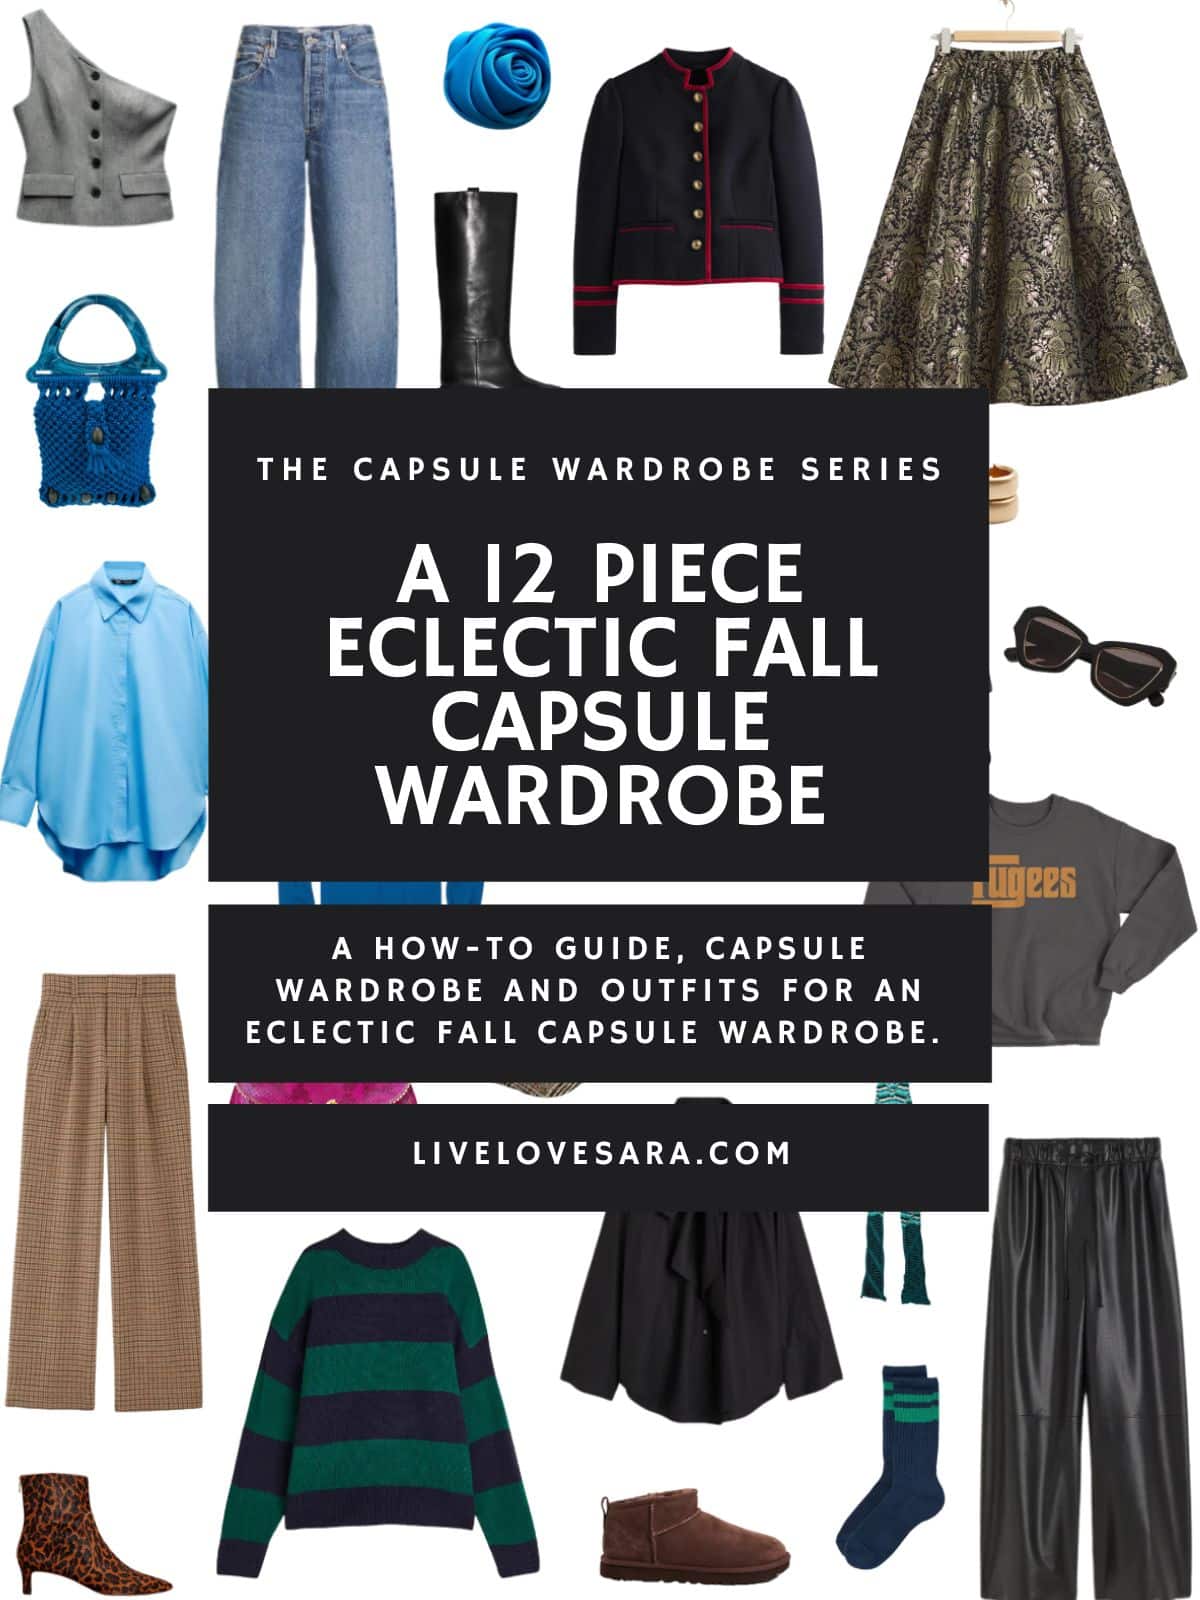 A white background with 12 clothing items plus shoes and accessories for an Eclectic Fall capsule wardrobe. In the middle is a black box with white text that reads, "A 12 Piece Eclectic Fall Capsule Wardrobe."